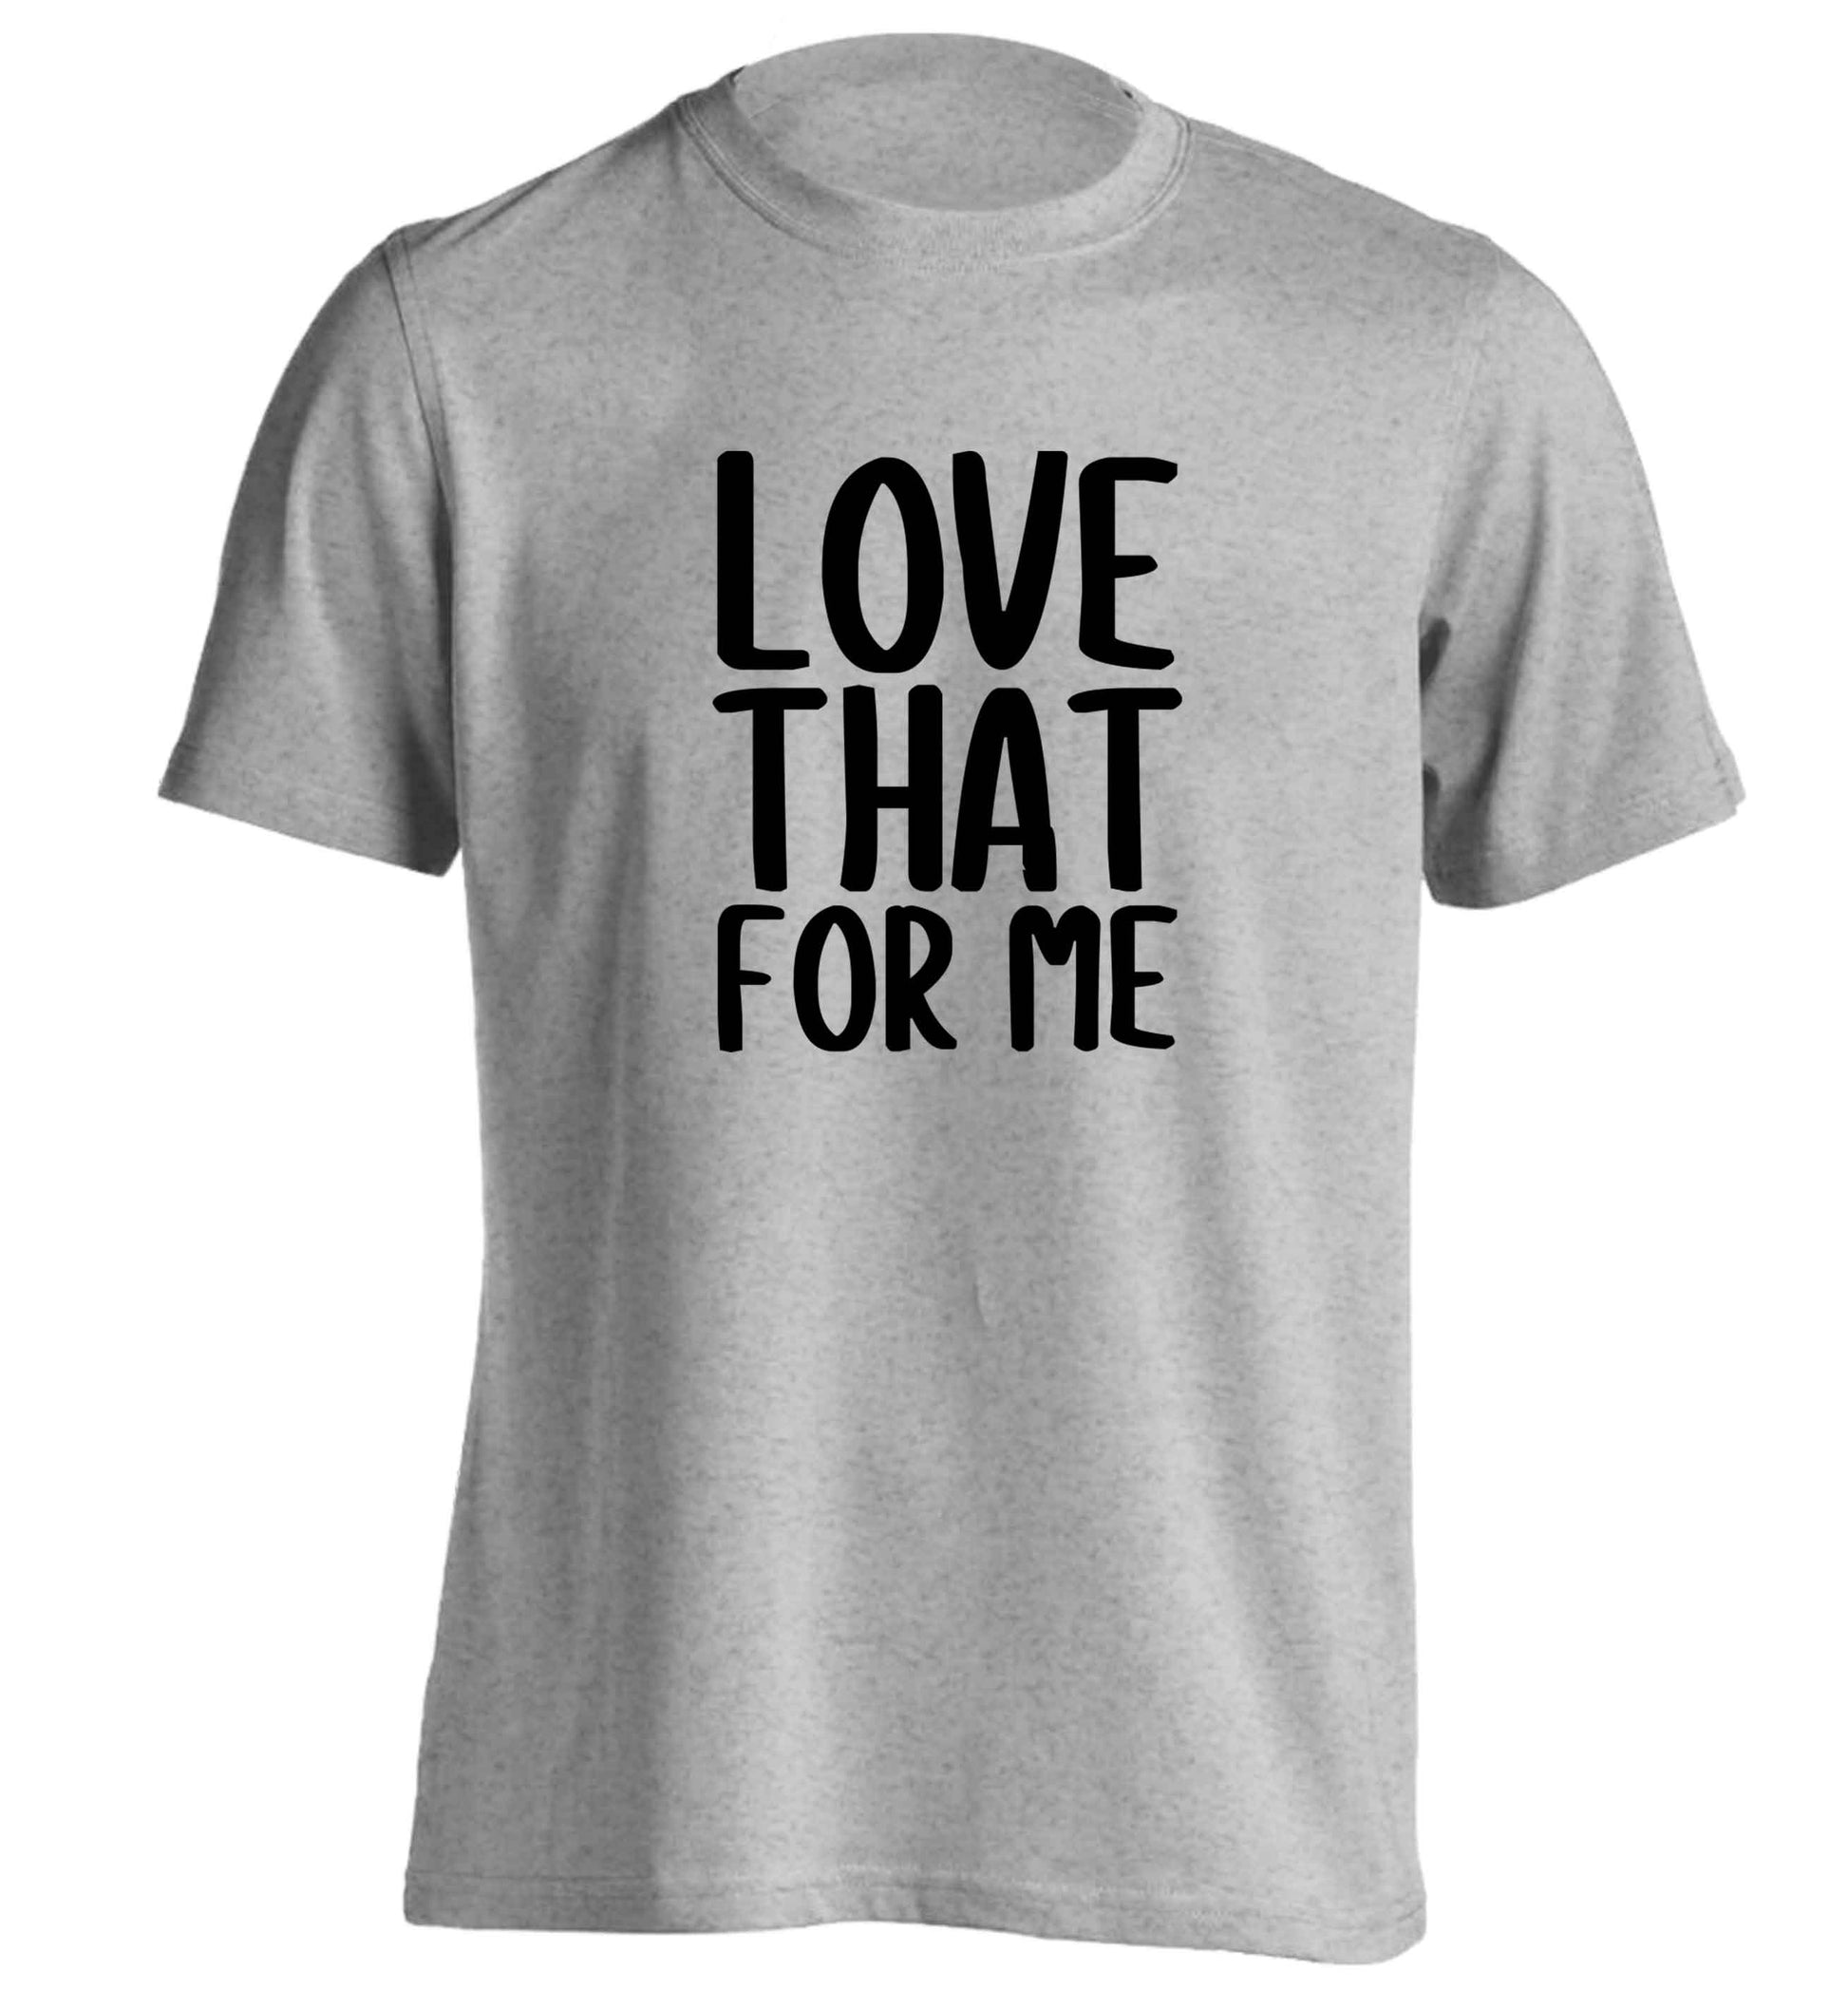 We love this for YOU! Who else loves saying this?!  adults unisex grey Tshirt 2XL